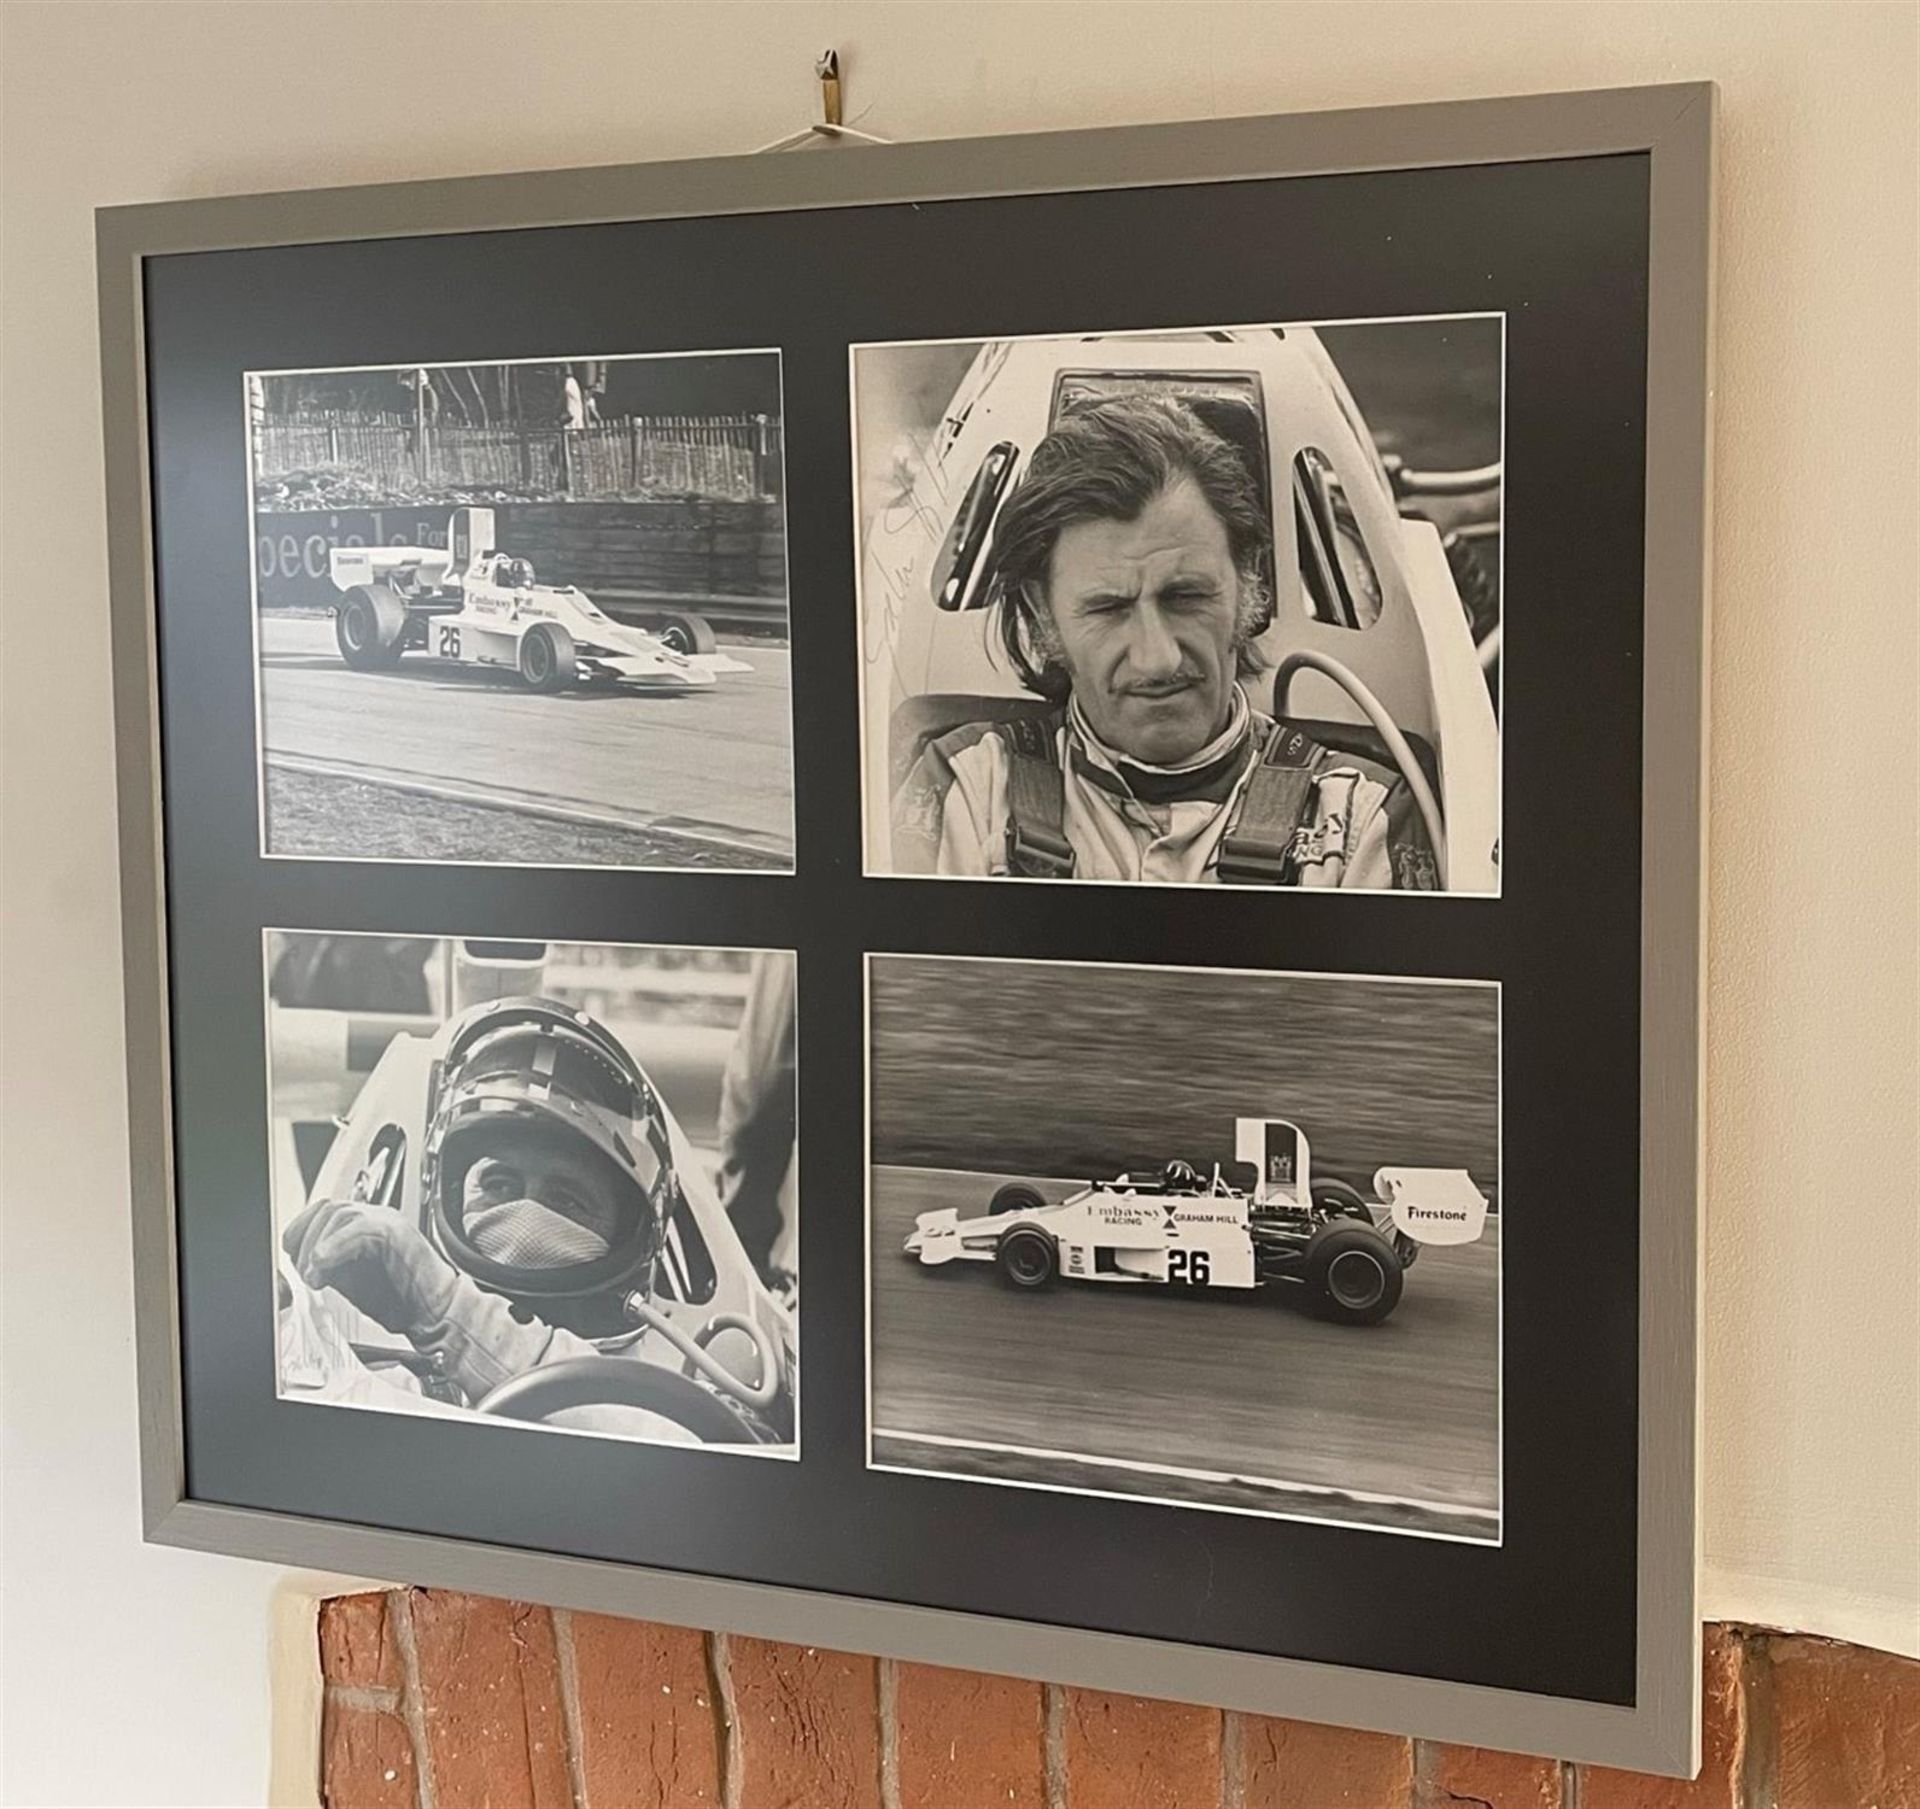 Four Original Photographic Prints of Graham Hill from the 1974 British Grand Prix* - Image 8 of 10